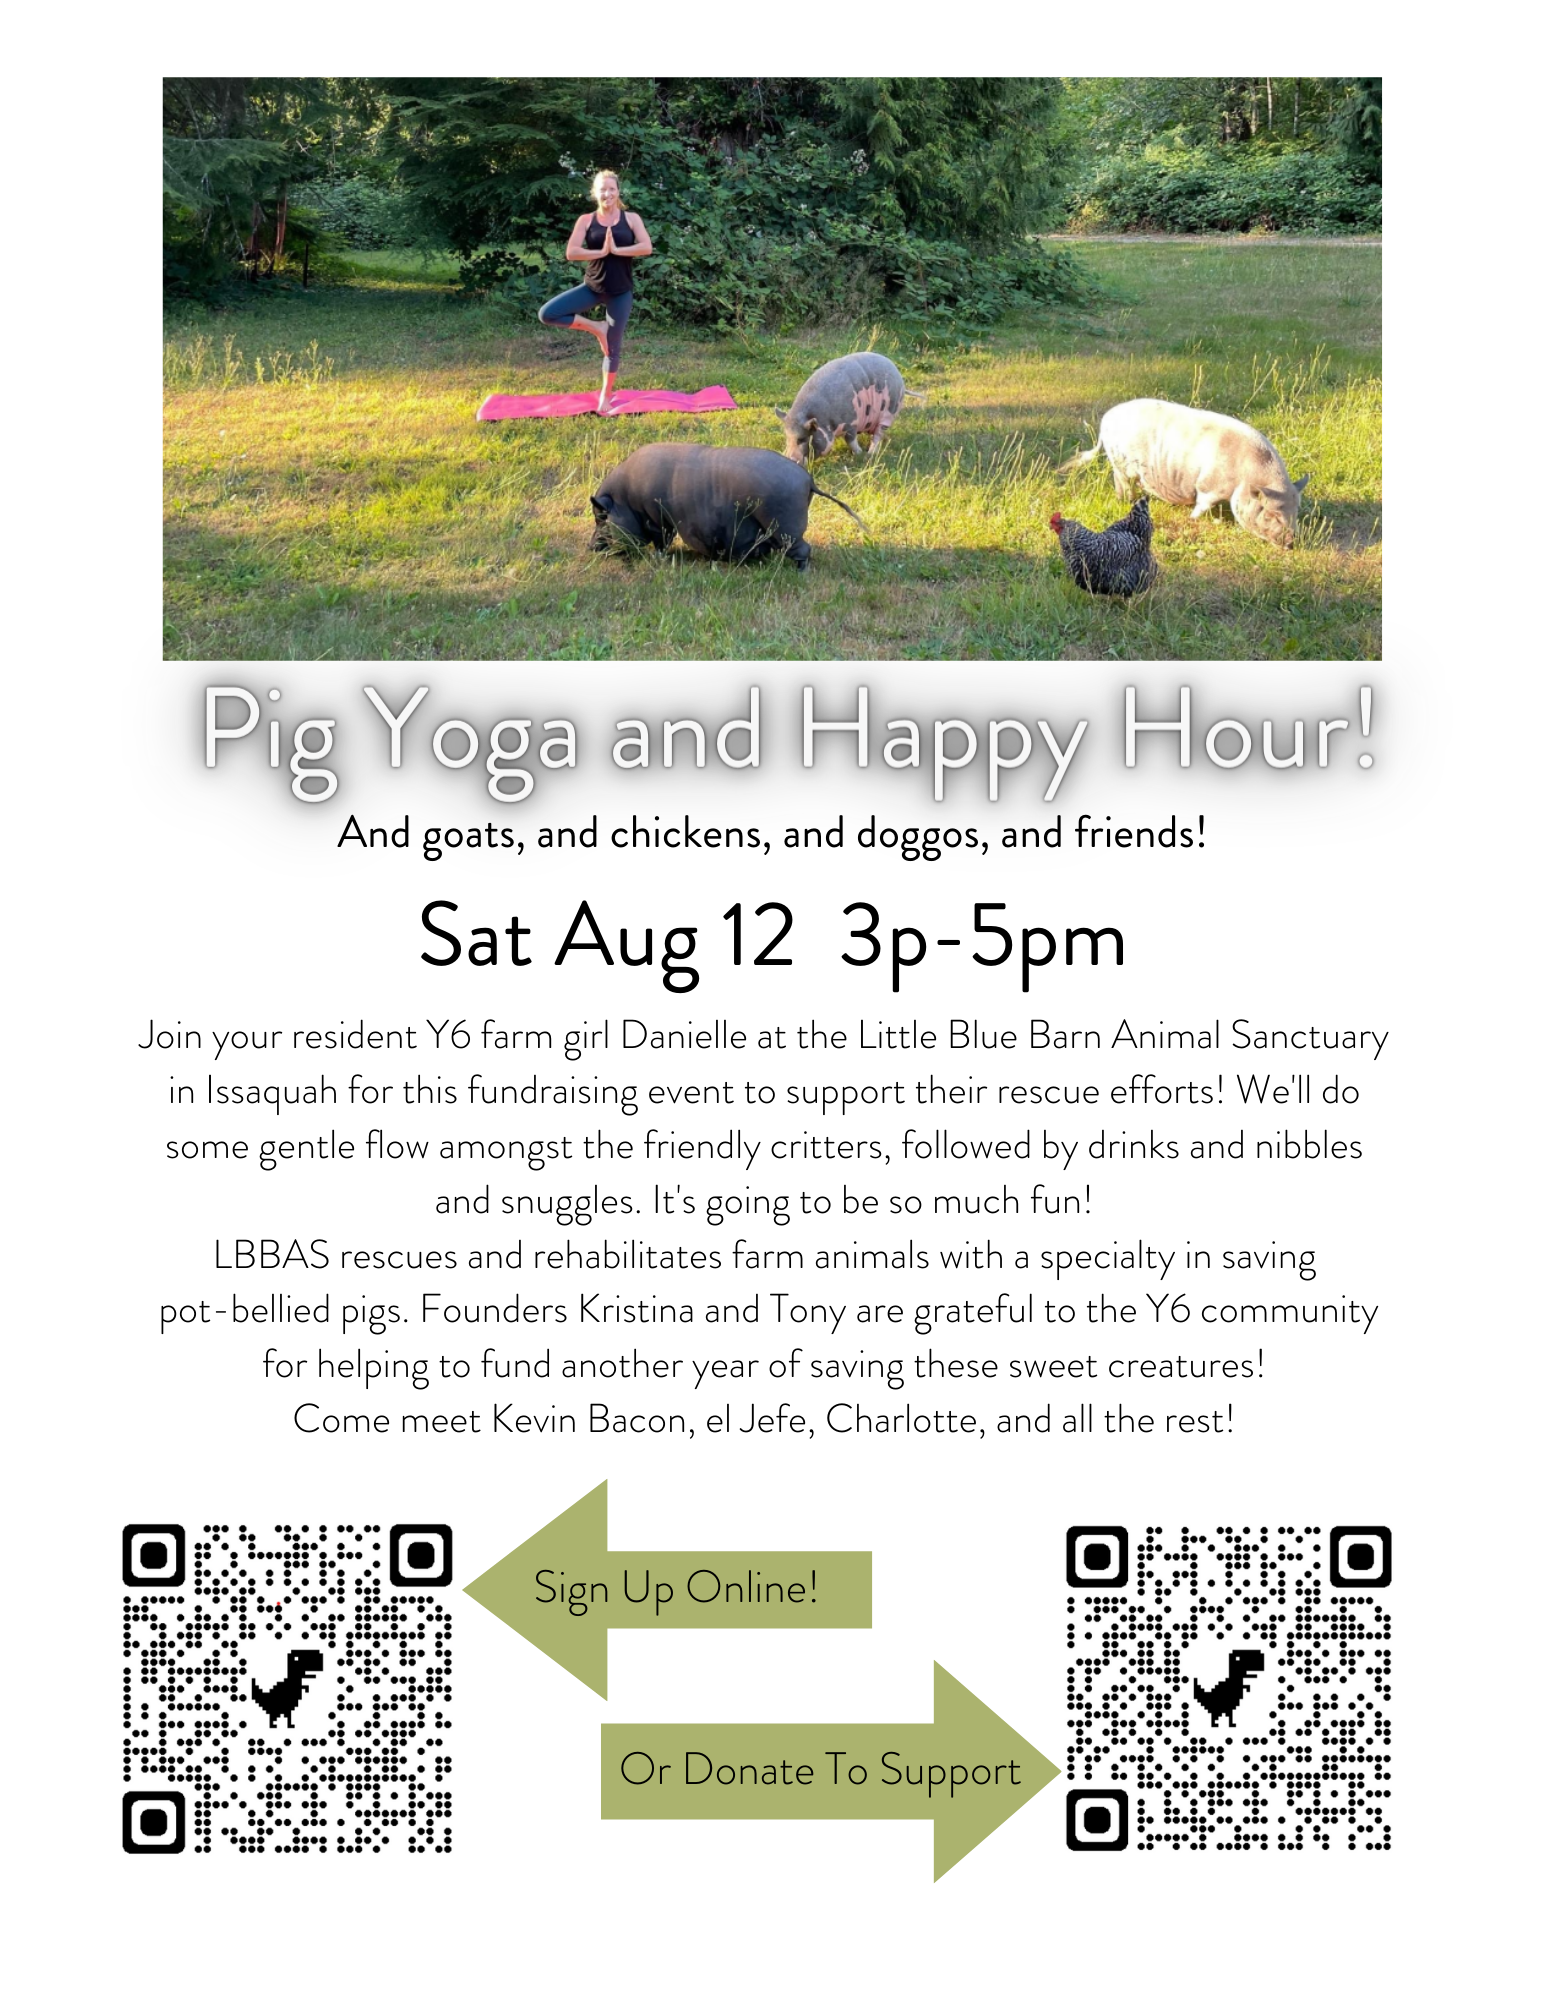 Pig Yoga and Happy Hour